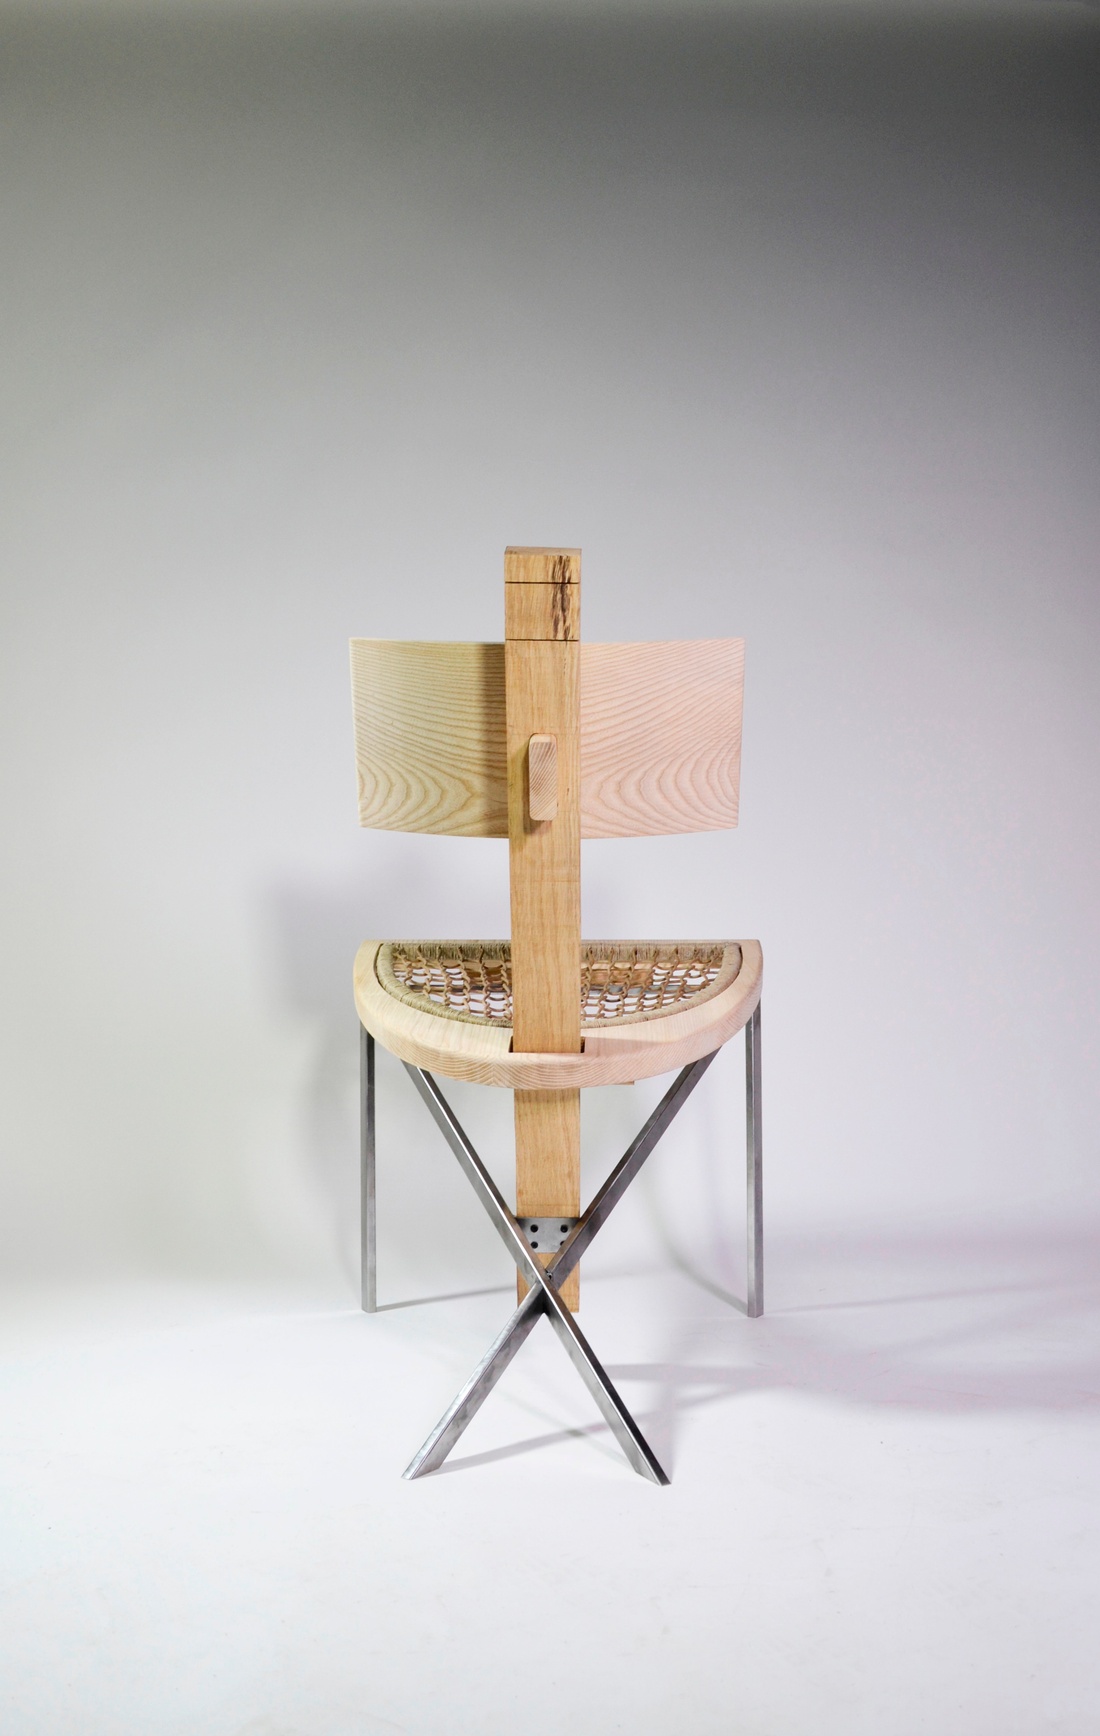 Chair by Andreas de Camps